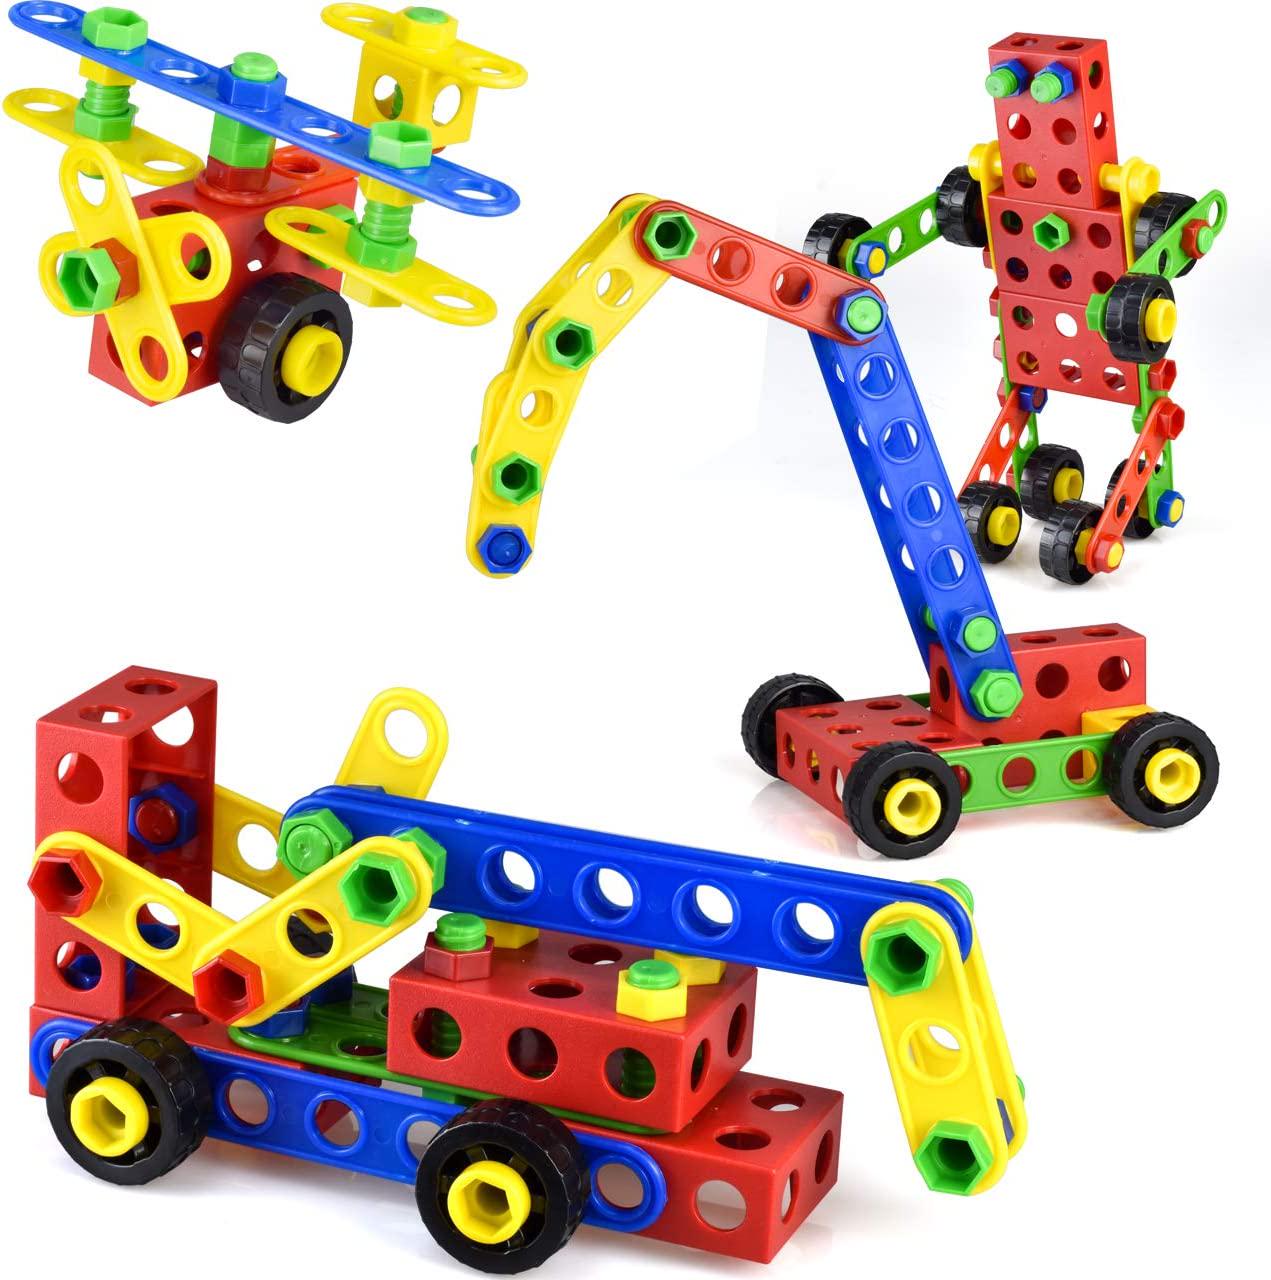 GHIFANT, GHIFANT 150 pcs Construction Building Blocks Preschool Educational Toys DIY Colorful Gifts for Age 3 +